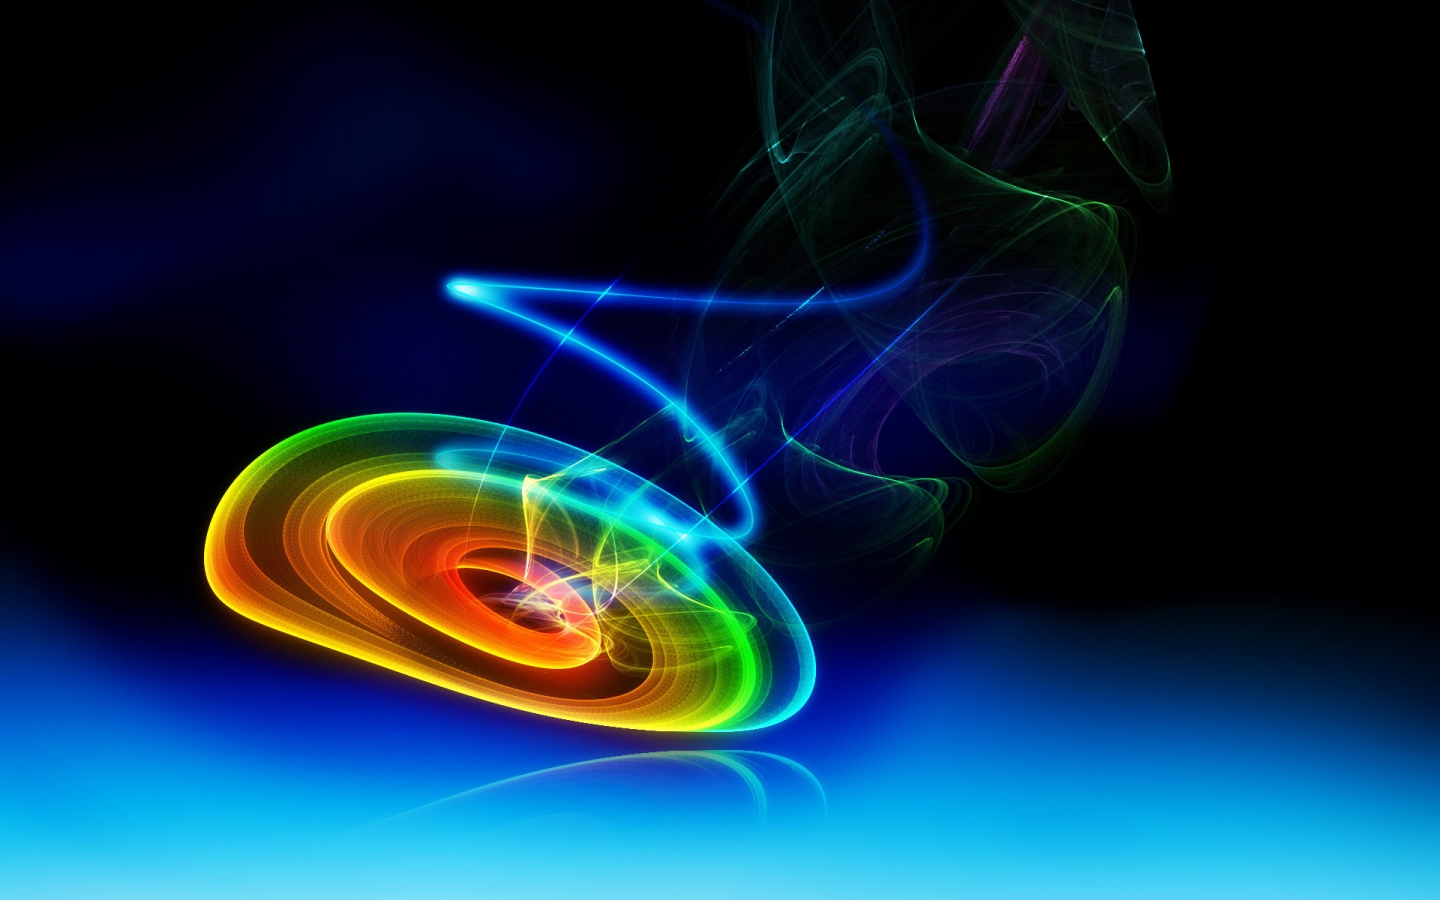 Stunning Abstract for 1440 x 900 widescreen resolution